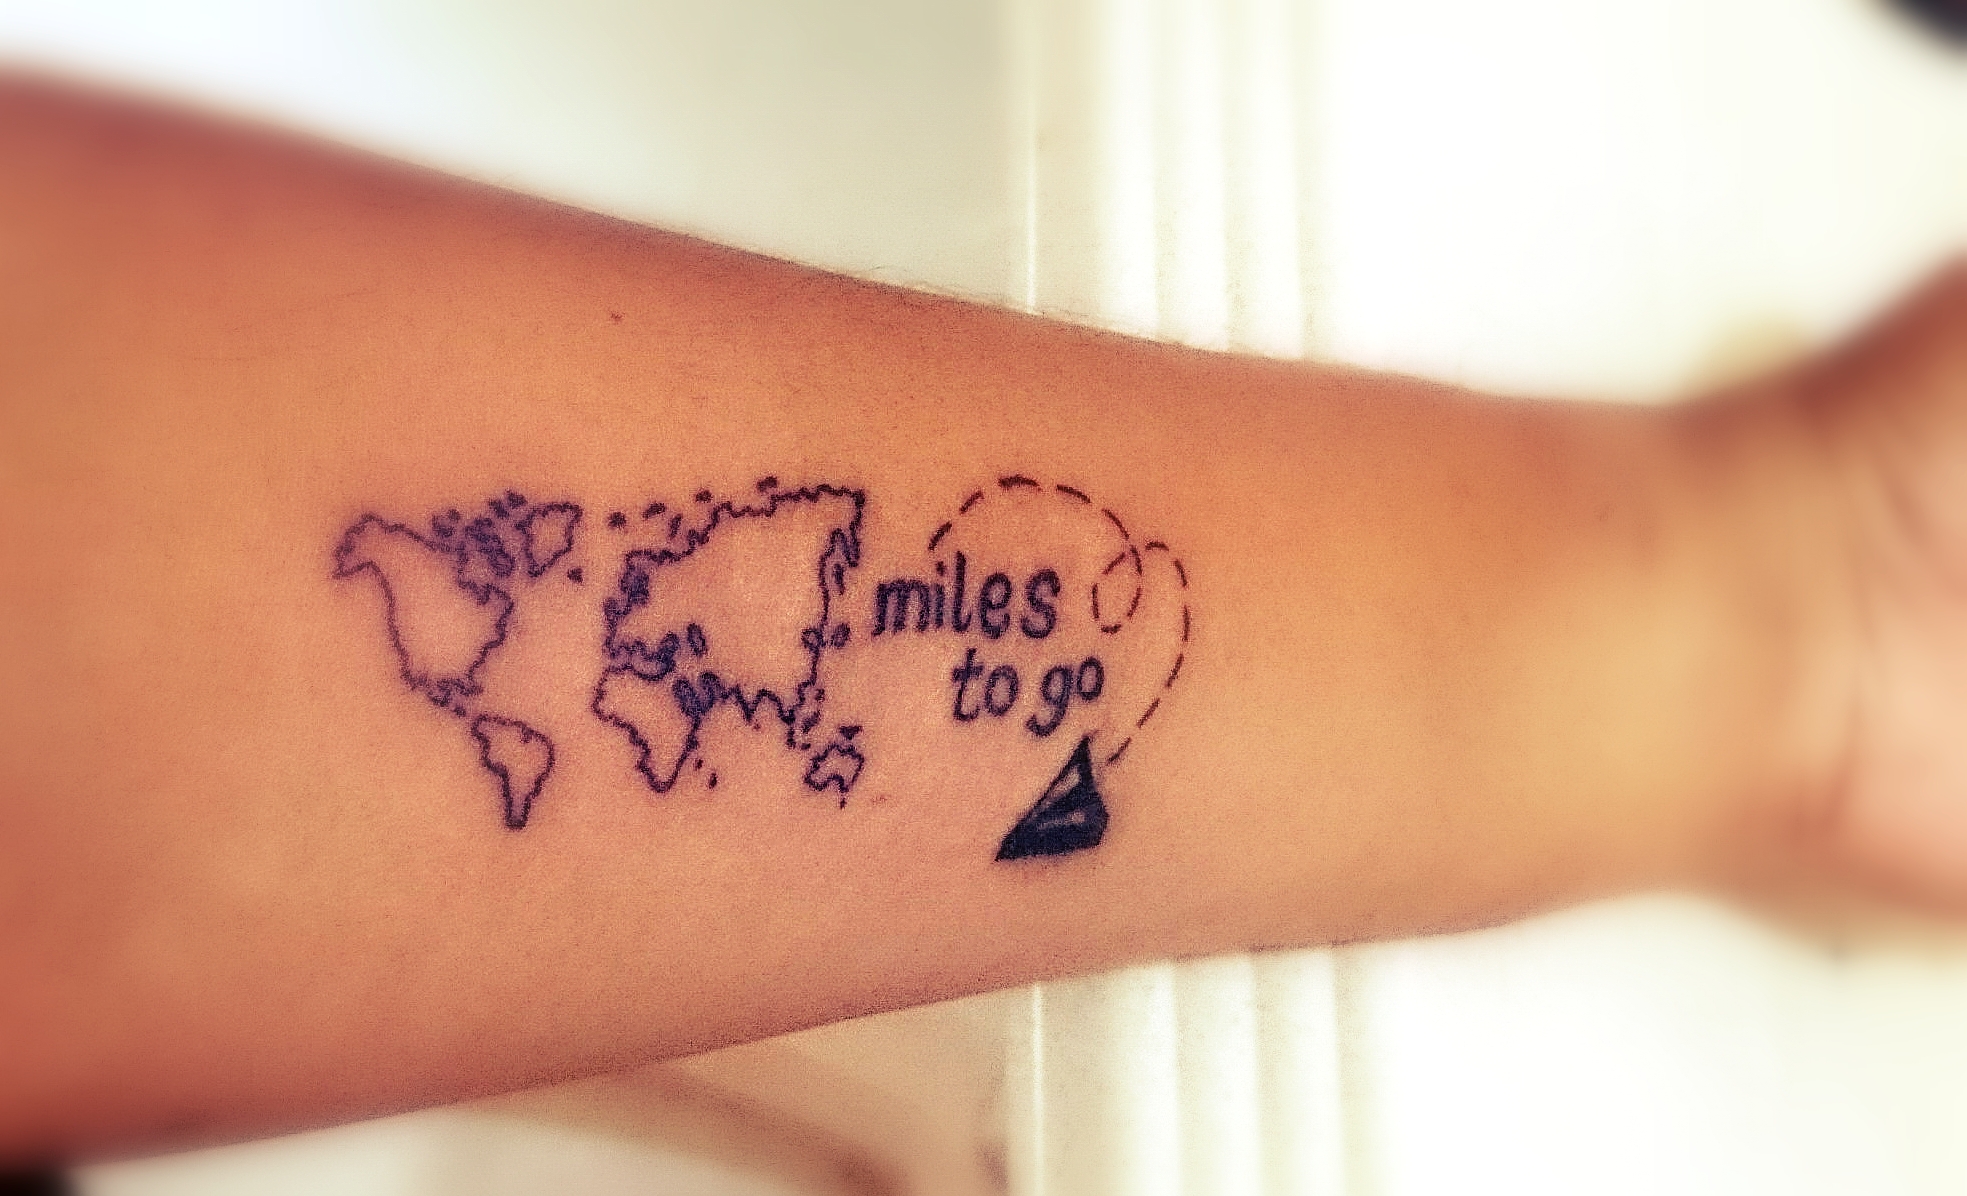 Tattoo Ideas; Best Tattoo Ideas for the Traveller in You